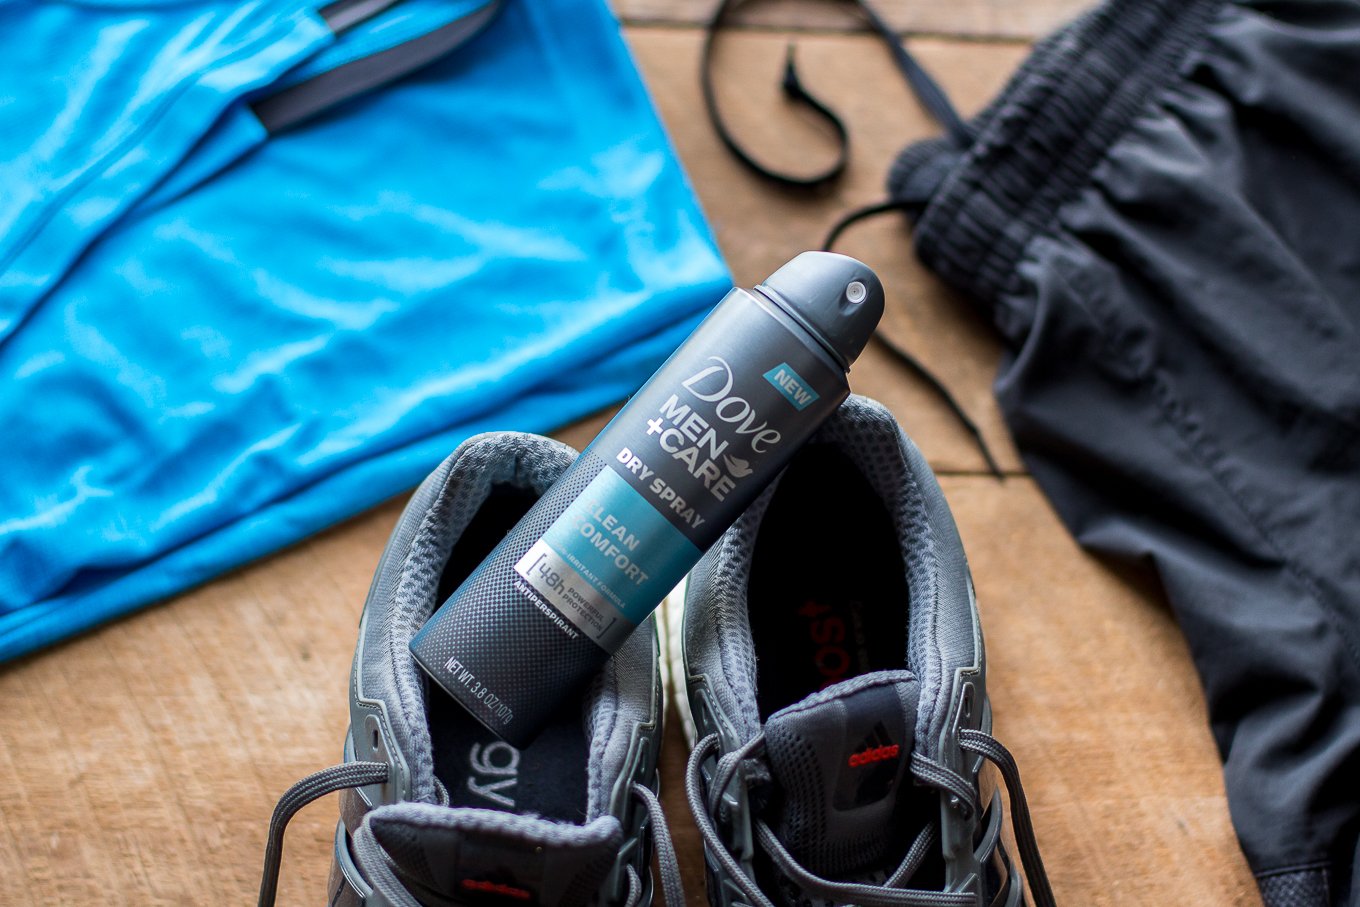 try dry, #trydry, running season, running season tips, what deodorant to wear during a run